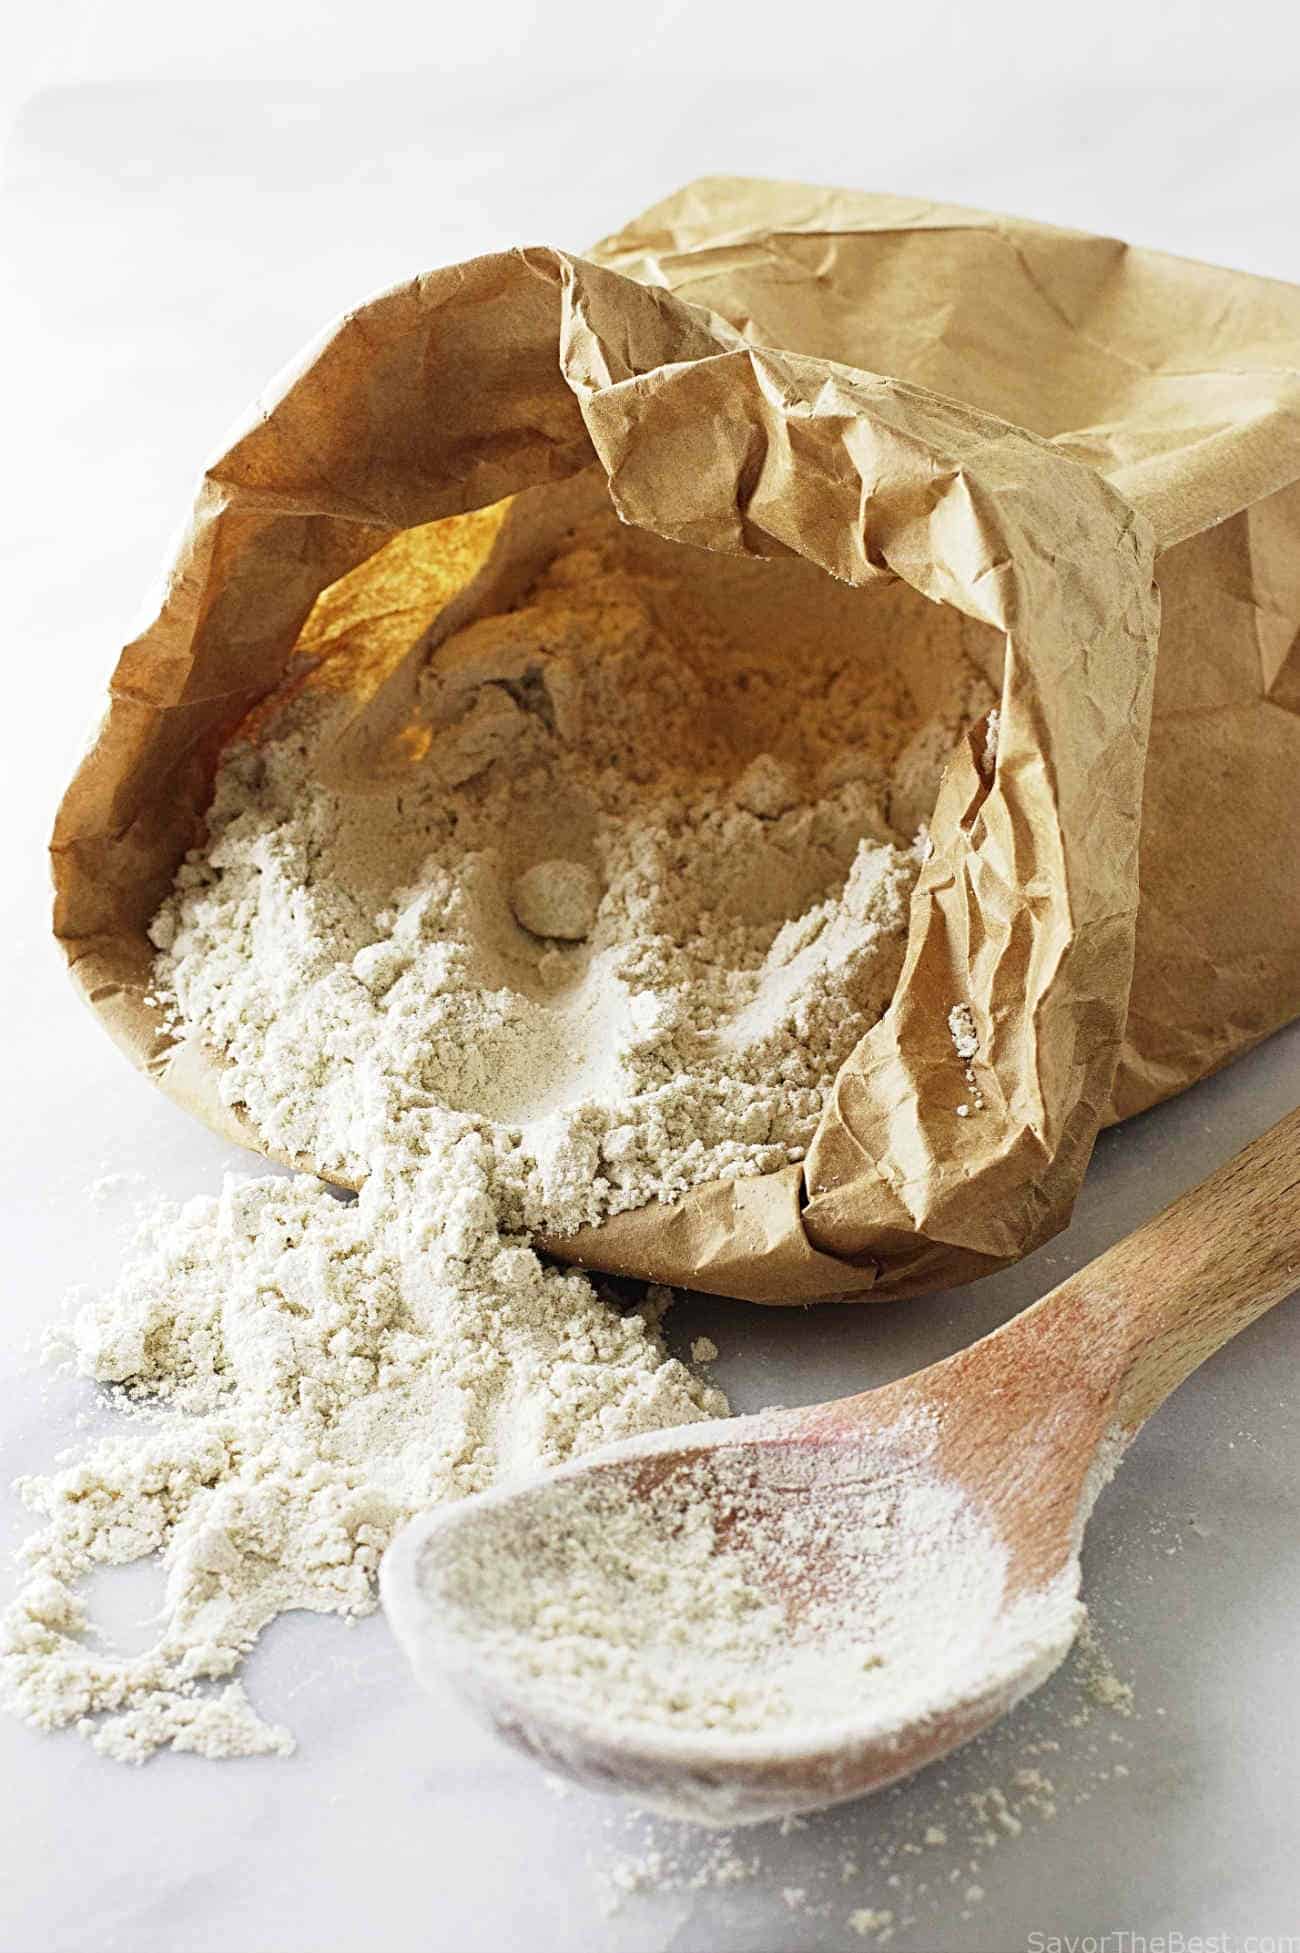 This flour blend can be used cup for cup as a replacement for all-purpose wheat flour or whole wheat flour. It is corn free, peanut free, tree nut free, rice free and dairy free. Gluten free ancient grains provide exceptional nutrition, a high fiber content and a wonderful flavor and texture to your baked goods.